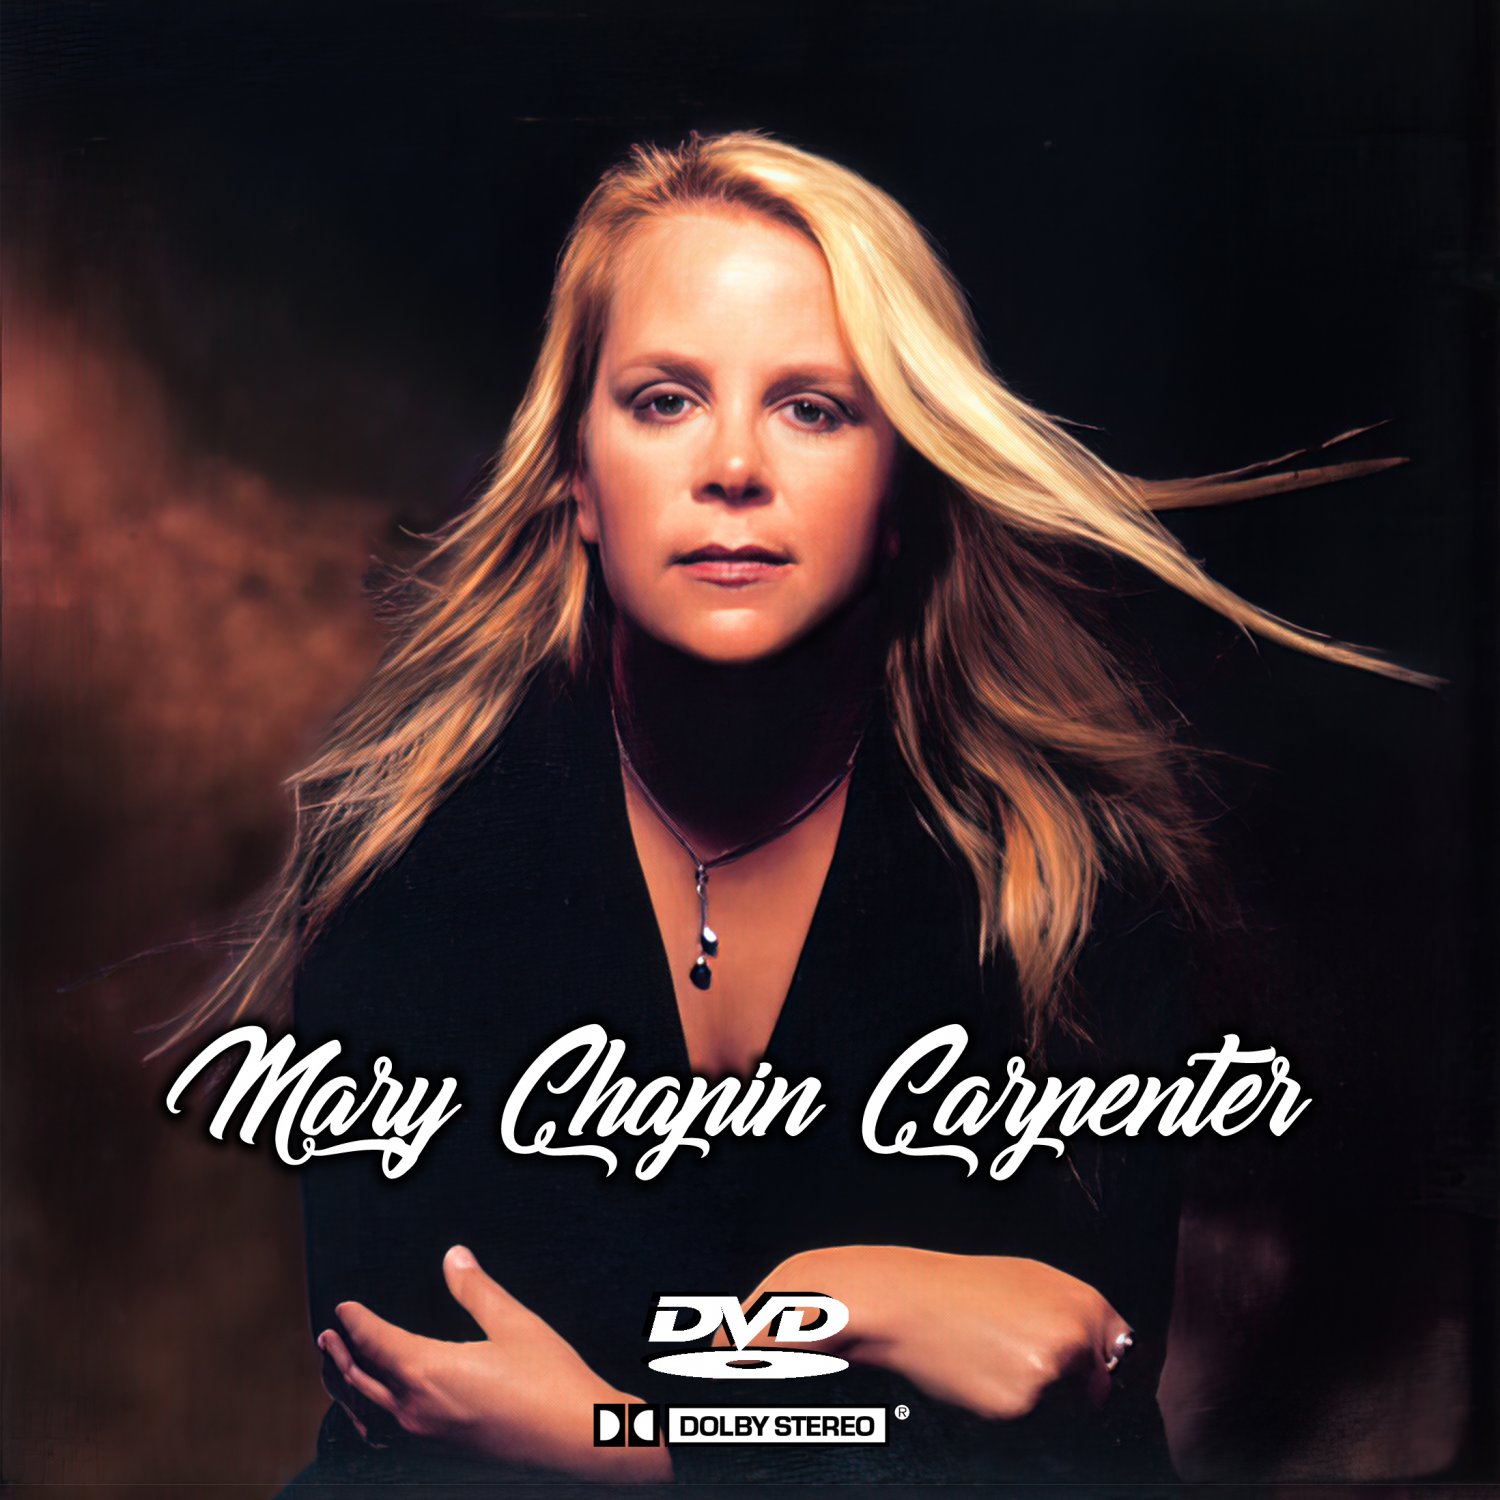 Mary Chapin Carpenter Music Videos Collection 1 Dvd 18 Music Videos